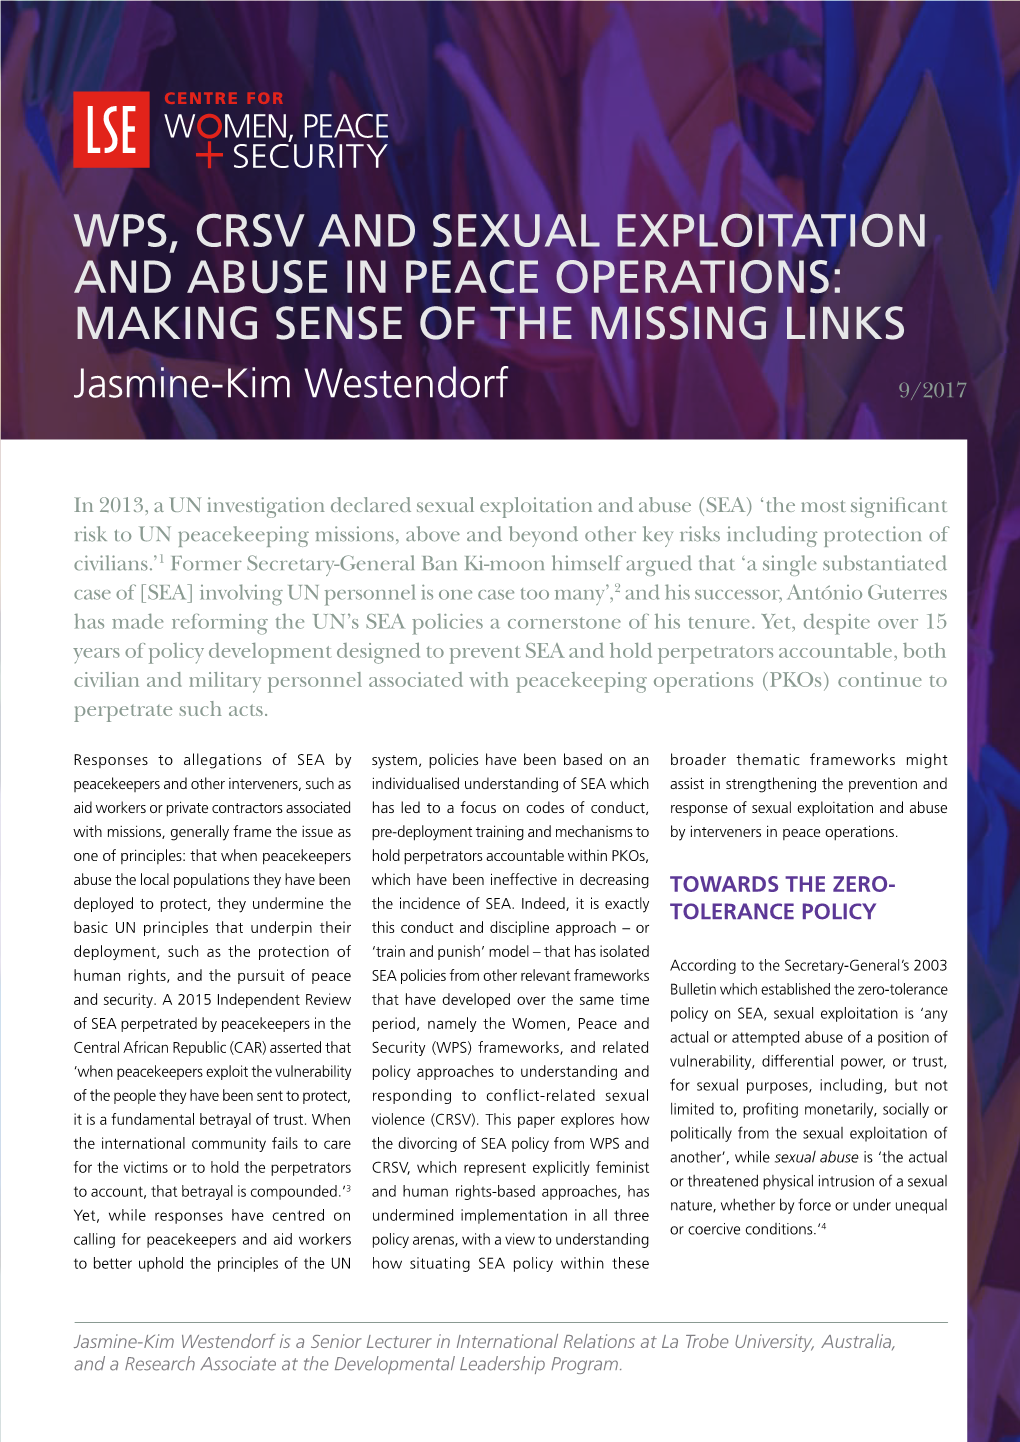 WPS, CRSV and Sexual Exploitation and Abuse in Peace Operations: Making Sense of the Missing Links